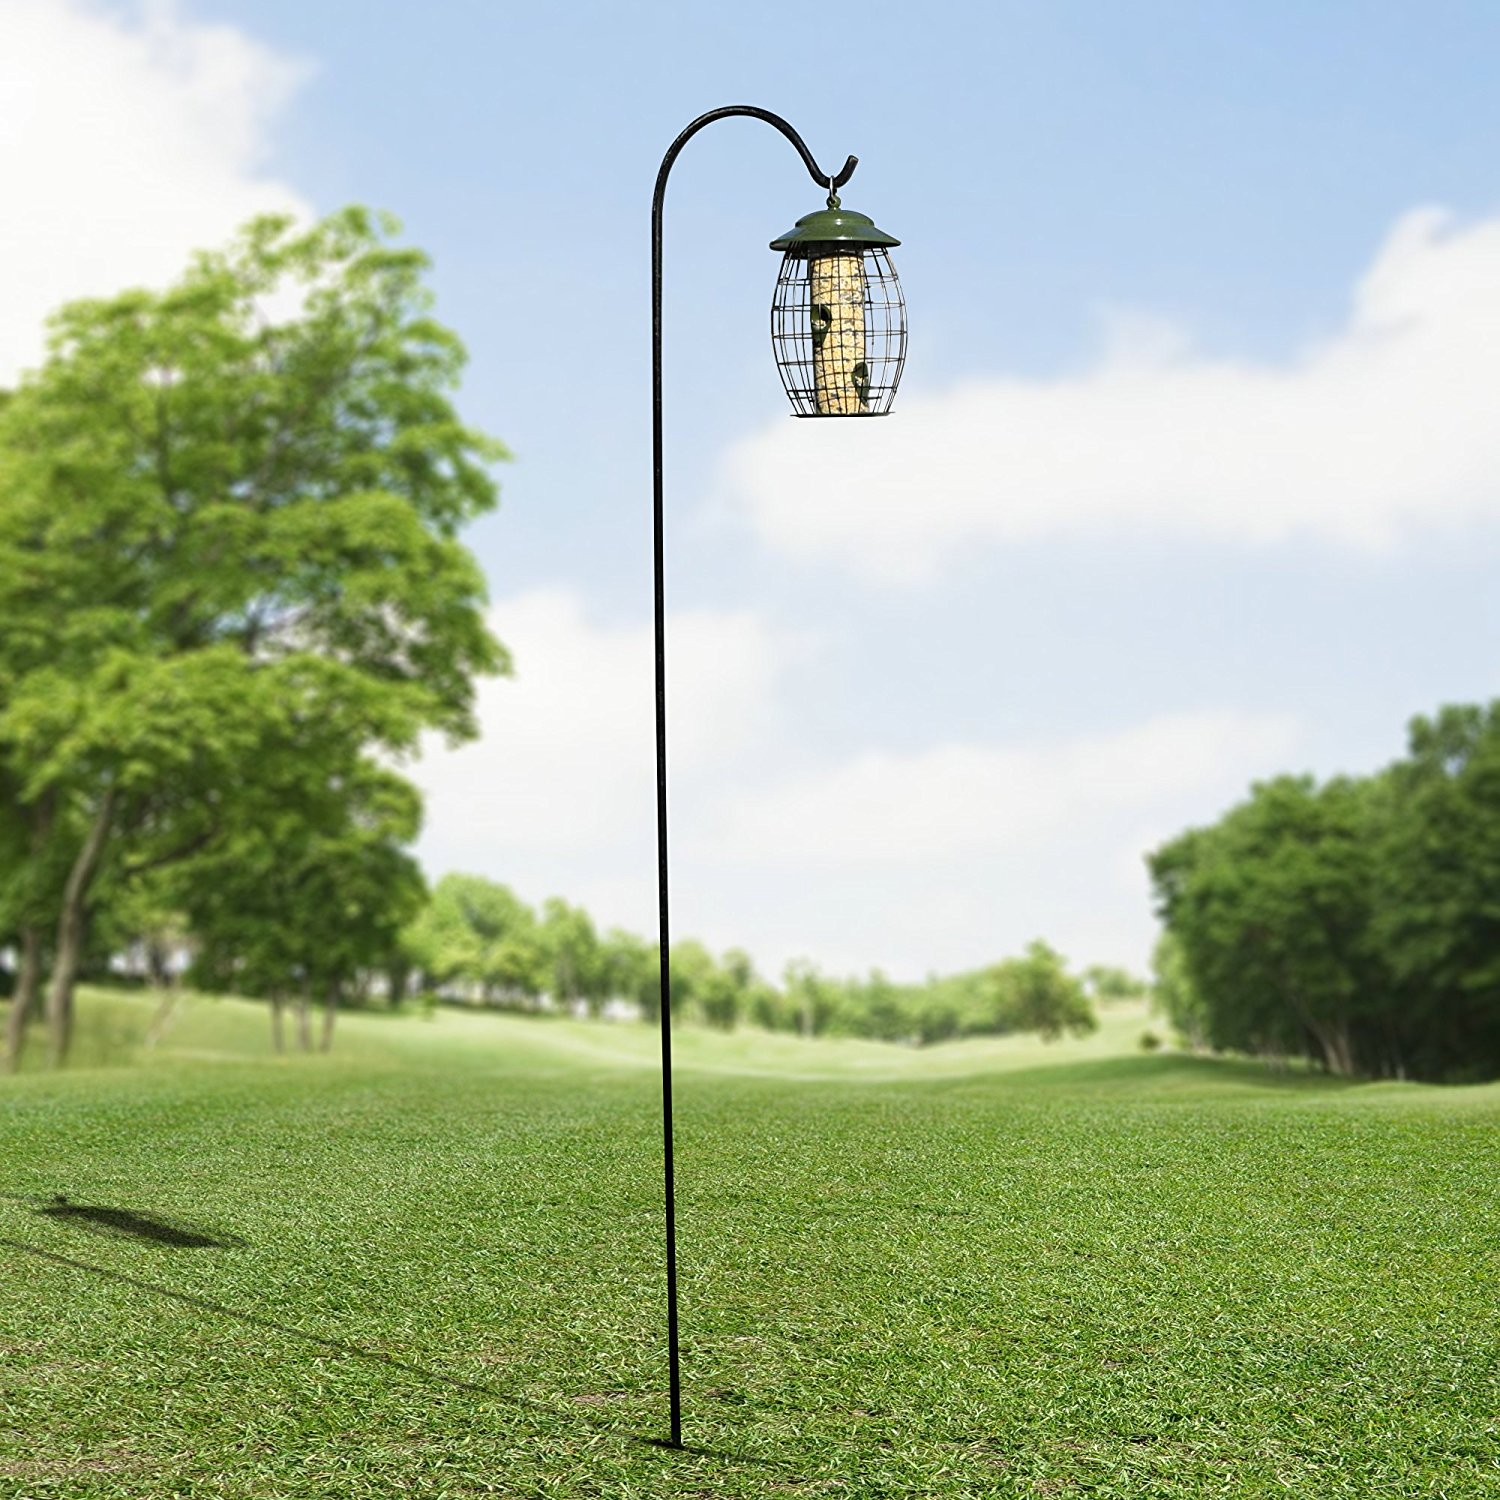 Tablet I'm happy Invalid The Top 4 Bird Feeder Pole Designs | whatdosquirrelseat.org